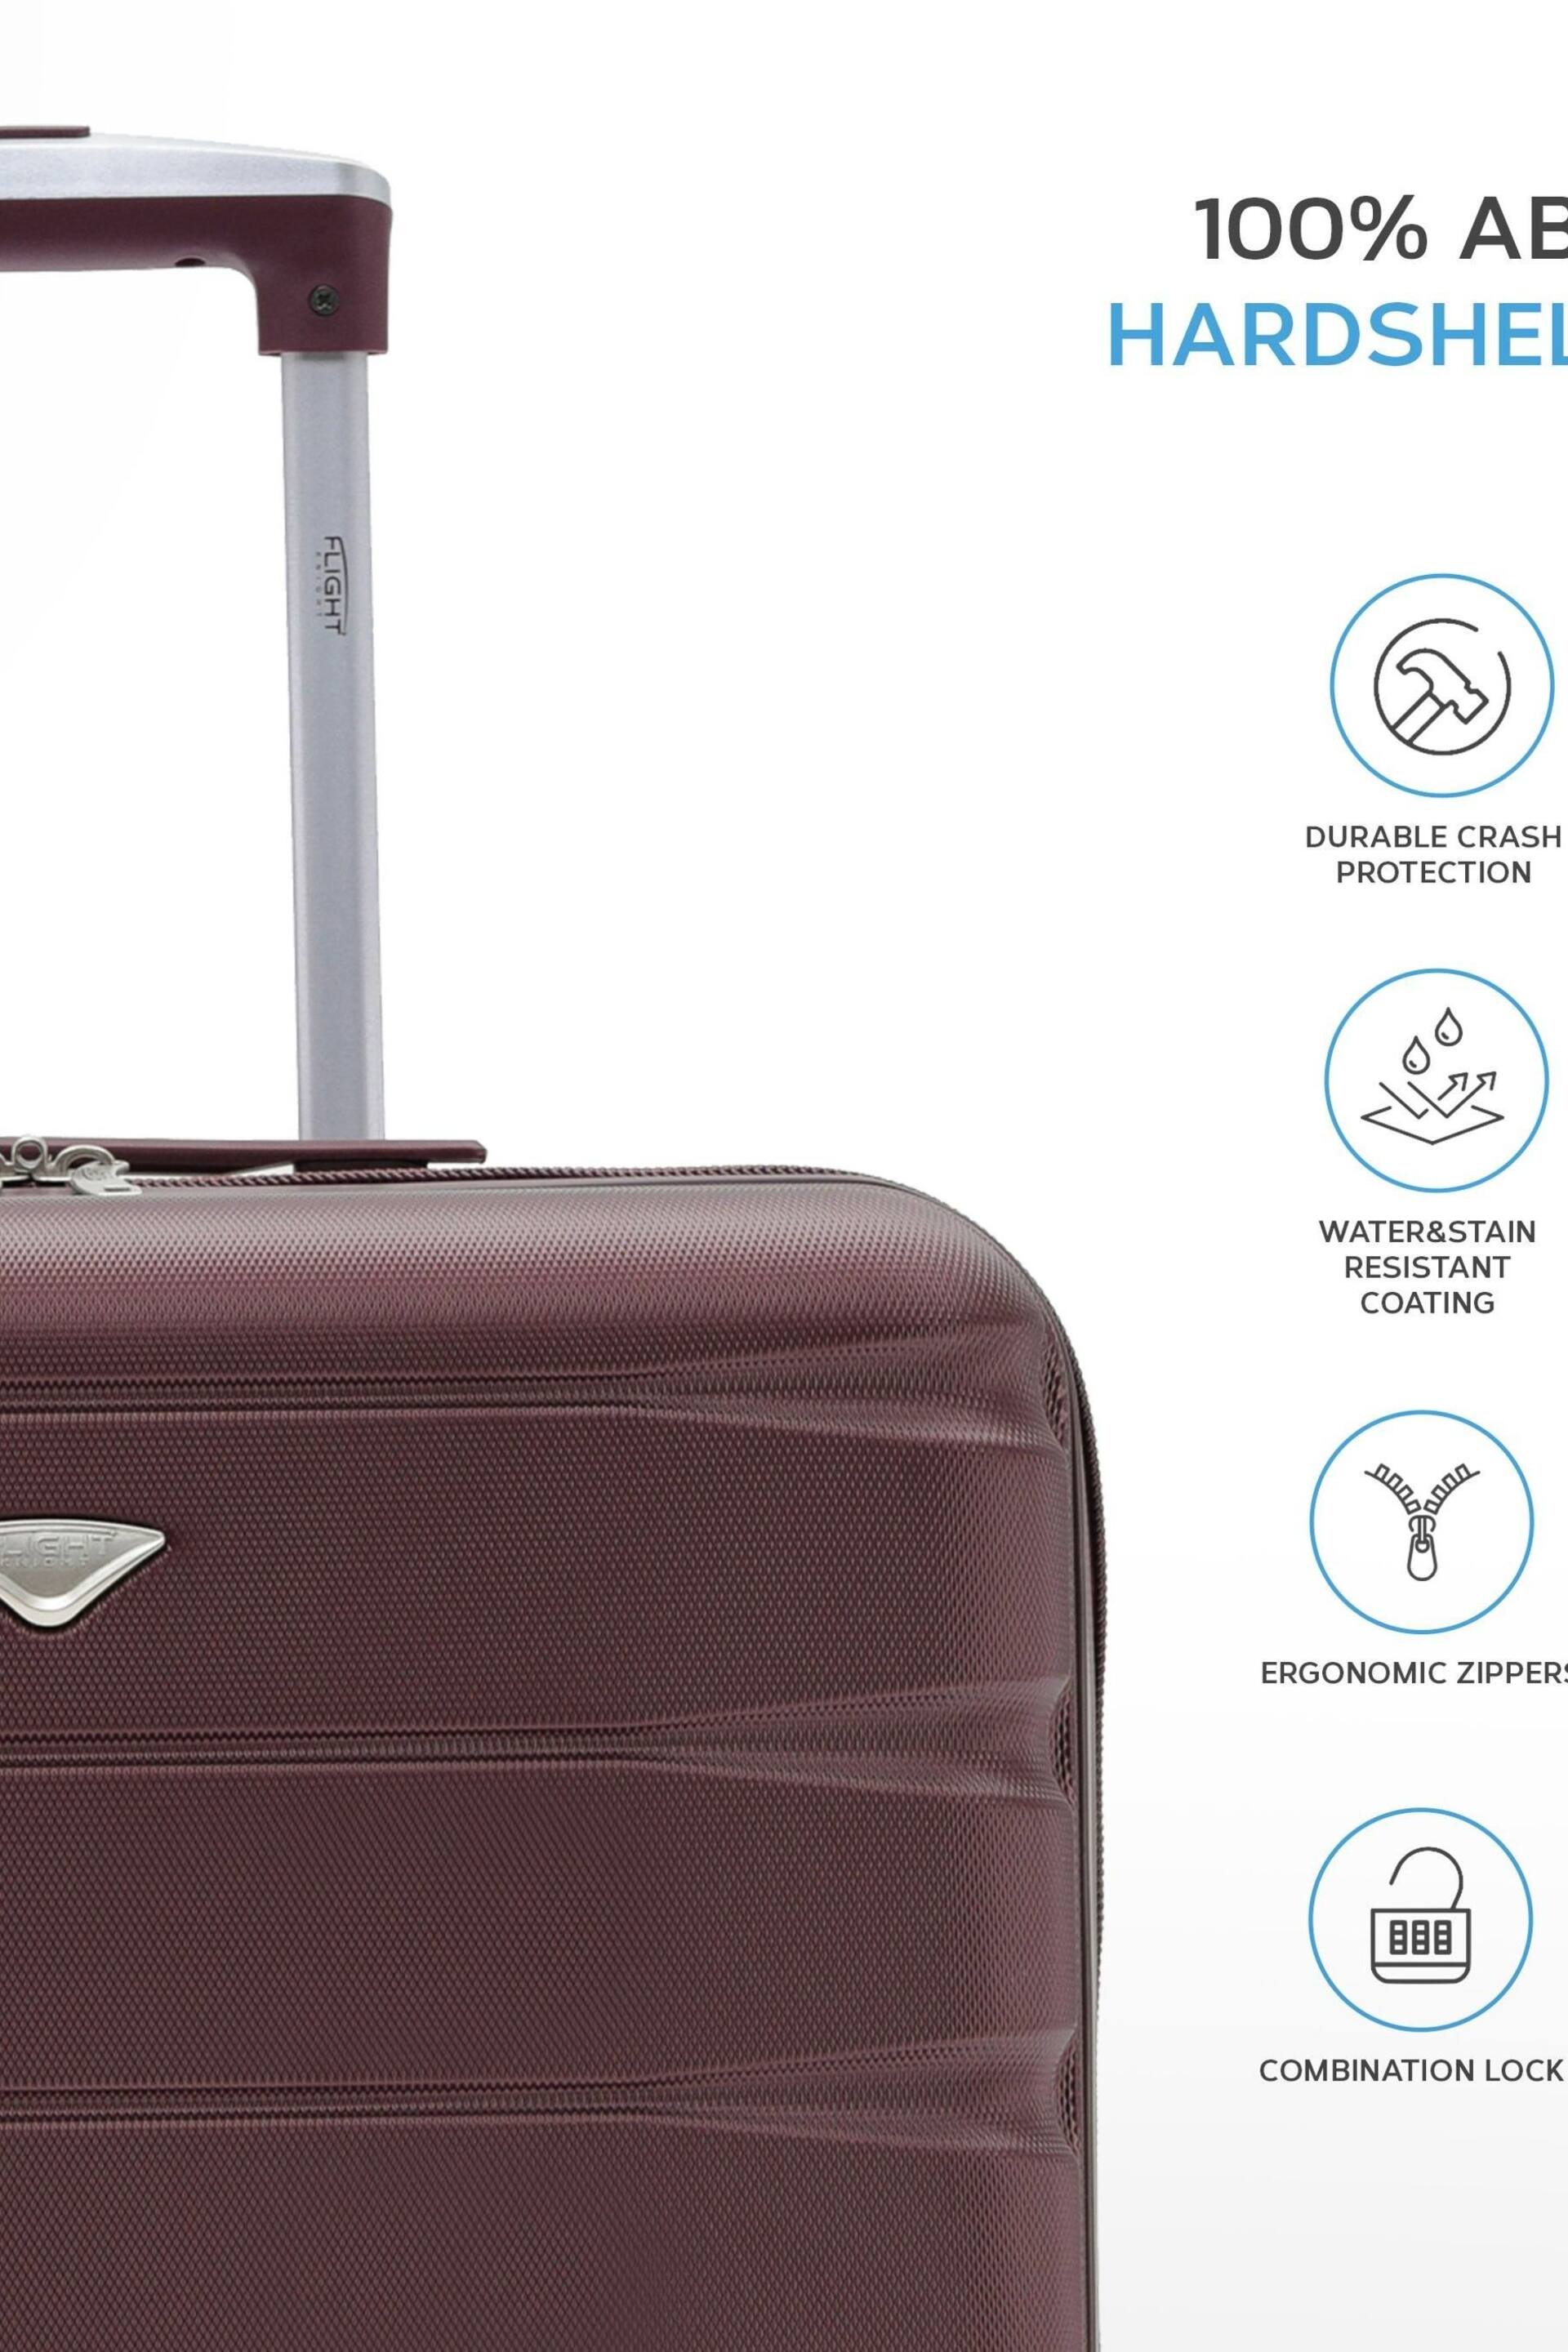 Flight Knight Burgundy + Burgundy EasyJet 56x45x25cm Overhead 4 Wheel ABS Hard Case Cabin Carry On Suitcase Set Of 2 - Image 7 of 8